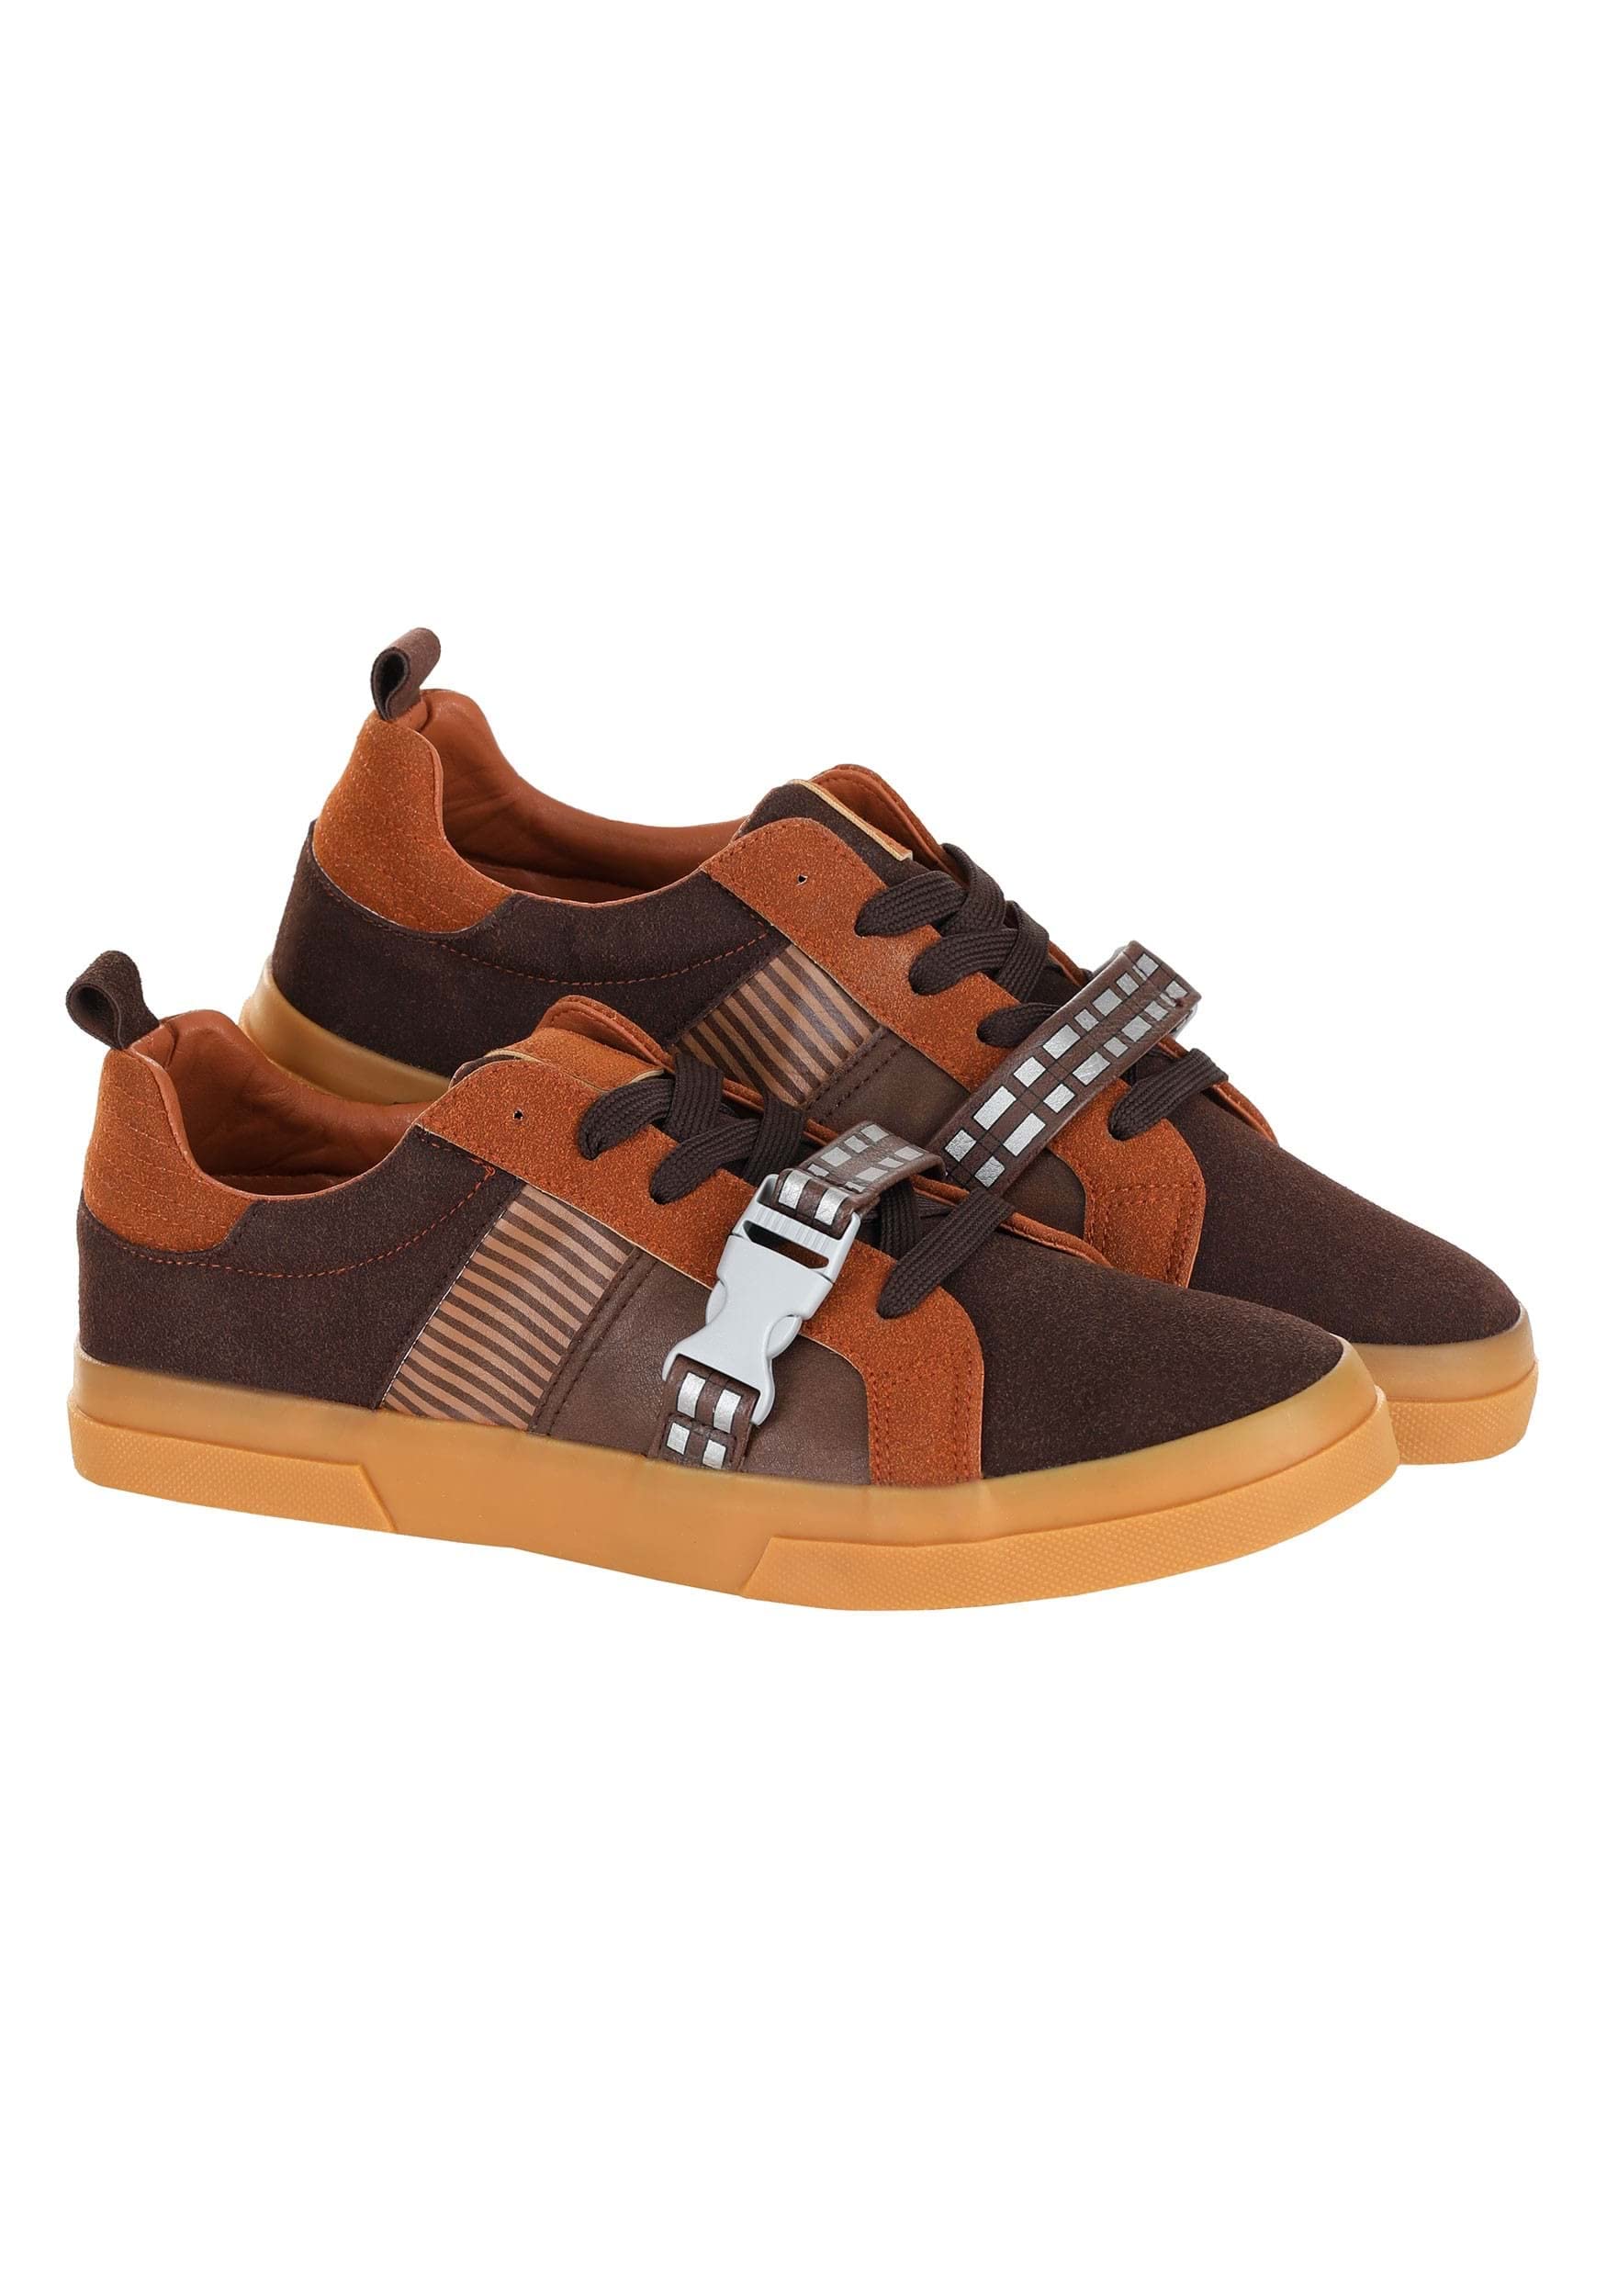 Unisex Chewbacca Star Wars Shoes for Adults Low-Top